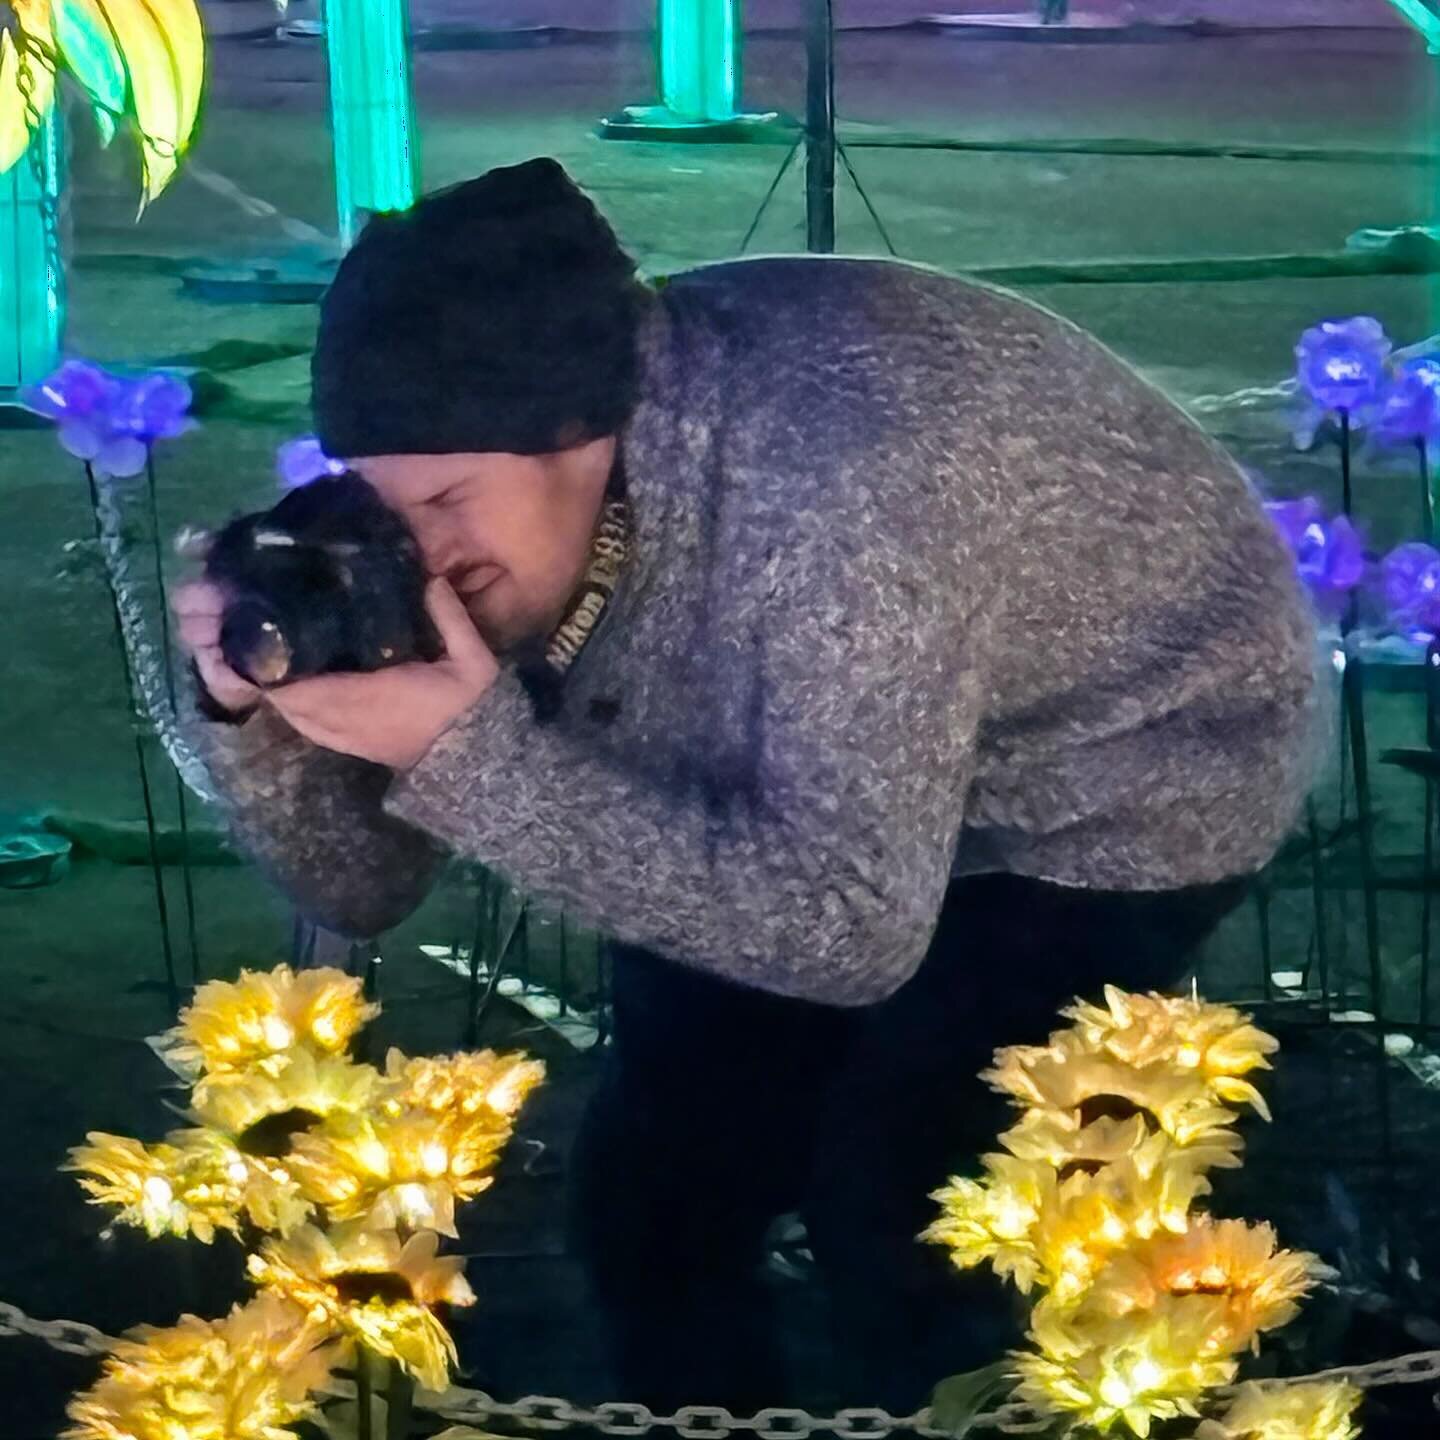 Thanks to my family for catching this ✨ stunning ✨ behind the scenes shot of me taking those flower photos at the Imaginarium last night! Haha. Photography is always so glamorous 🤪.